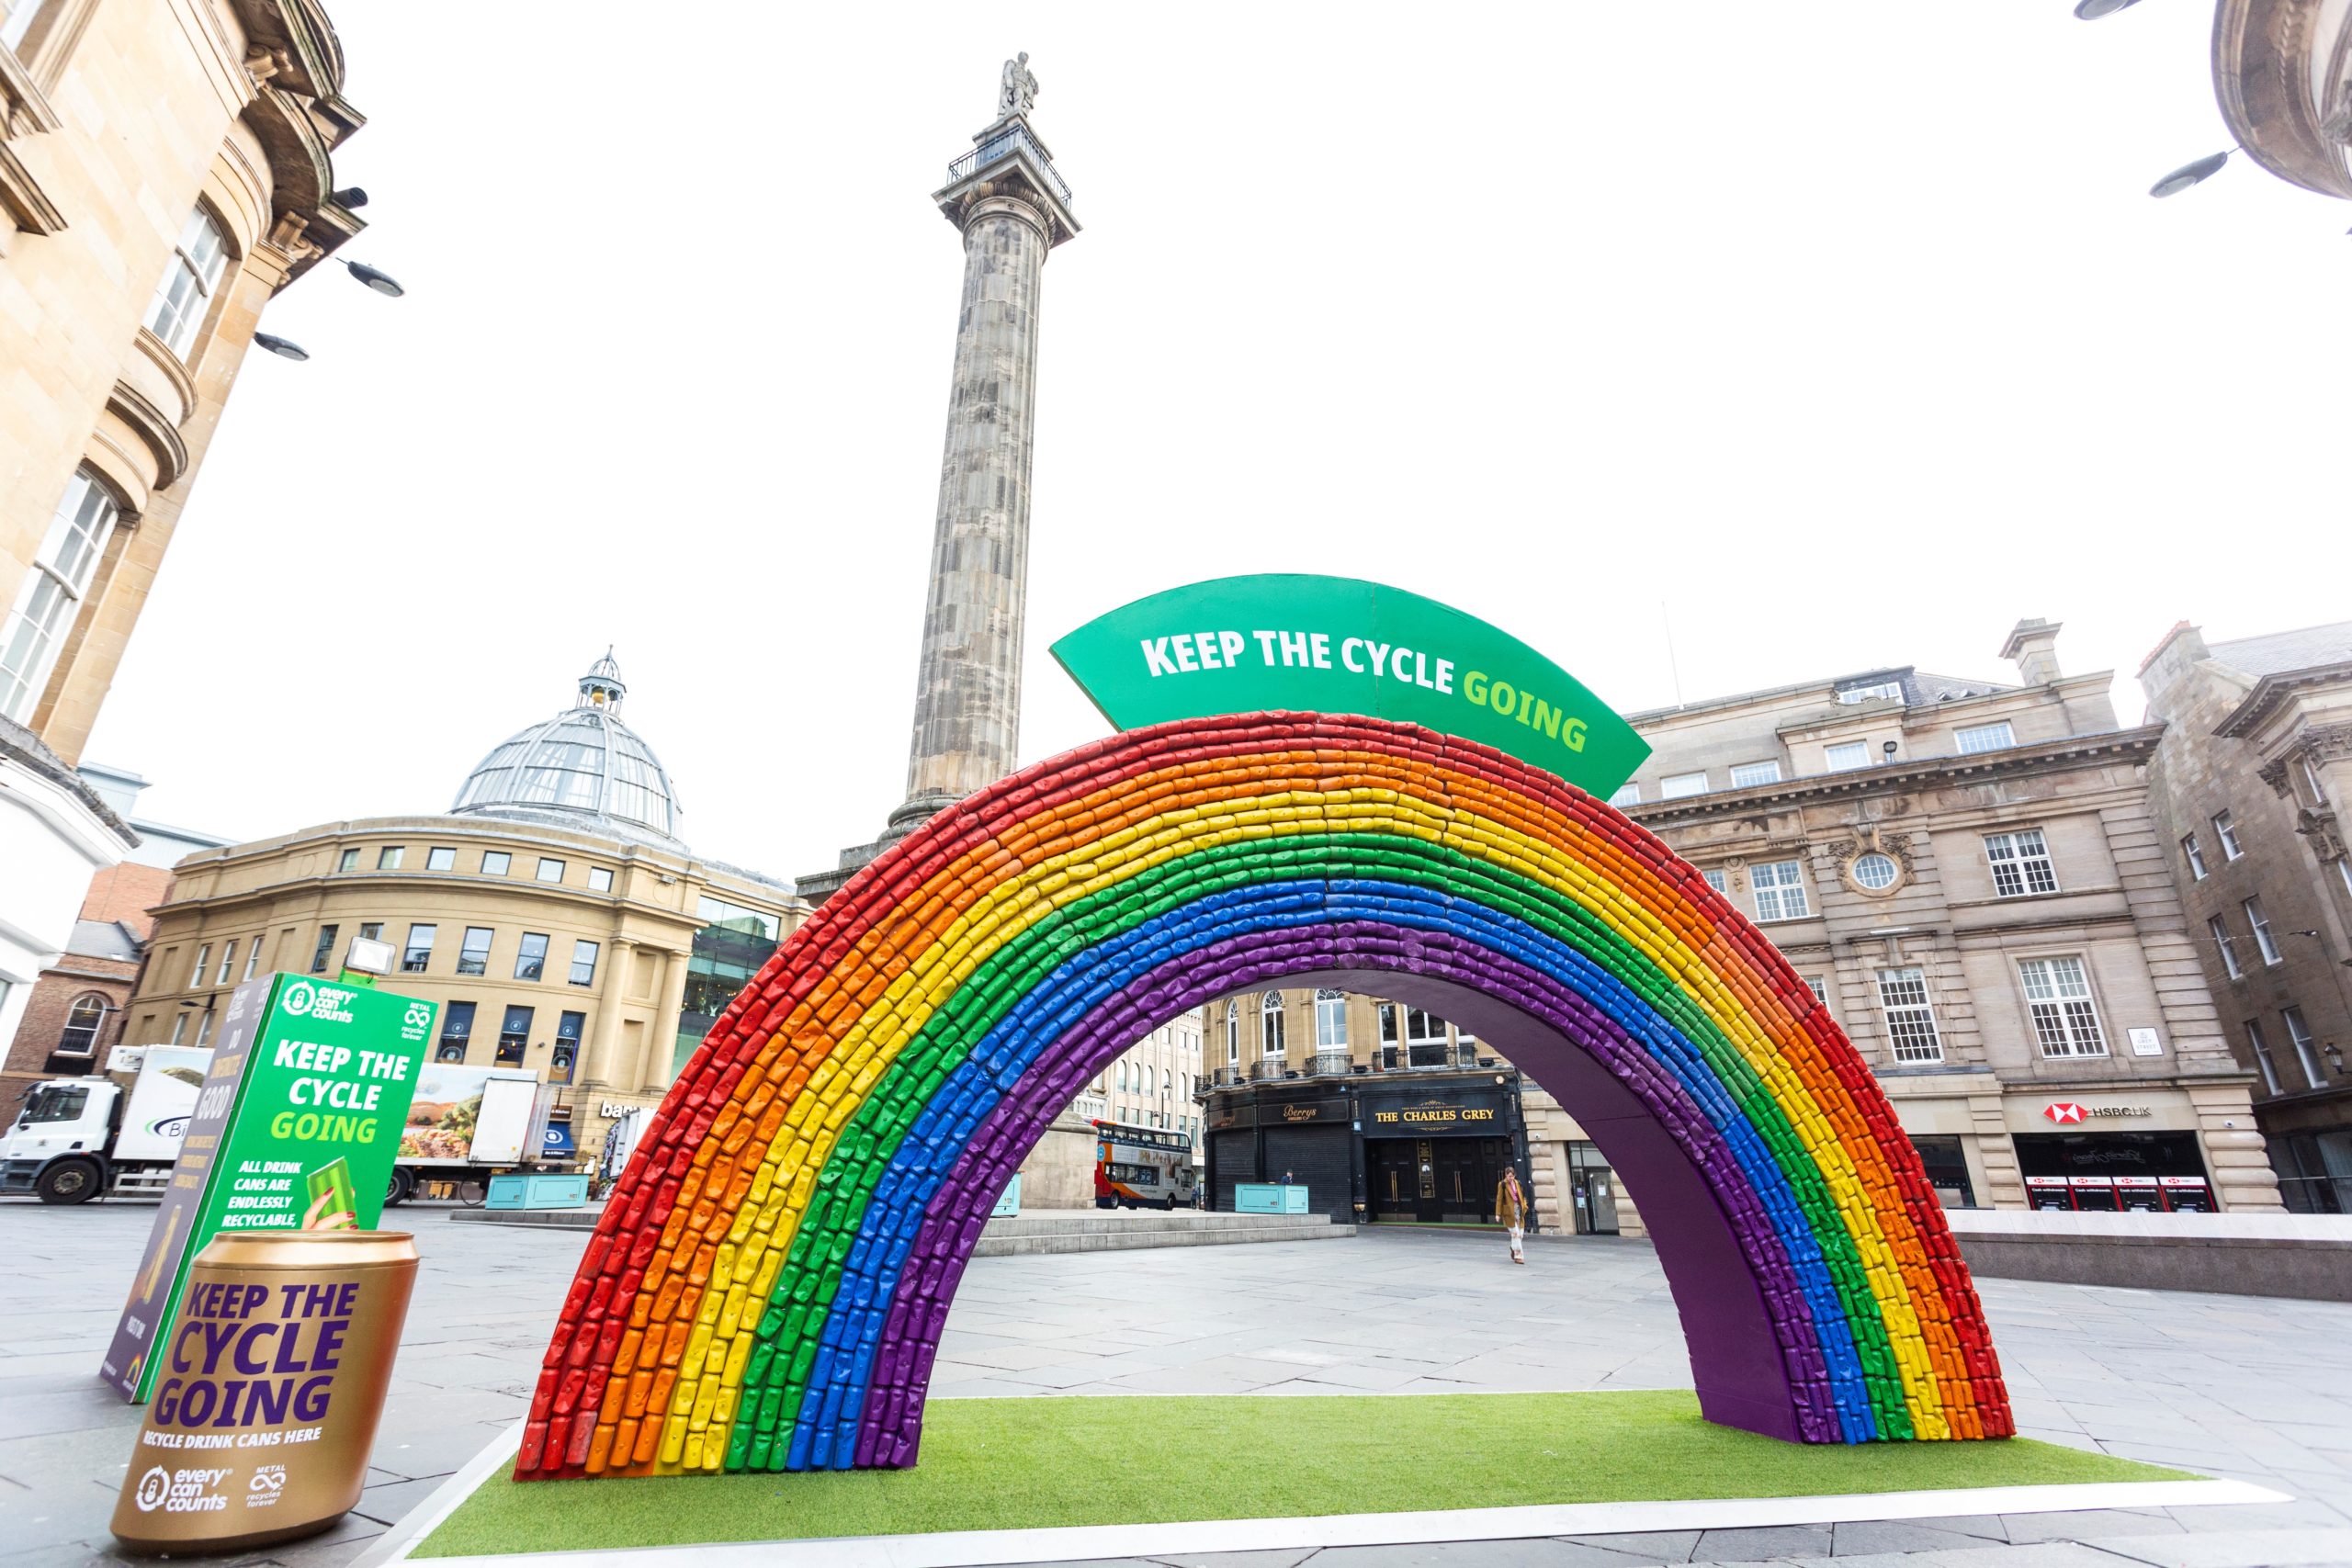 The Every Can Counts Rainbow in Newcastle for Earth Day 2022